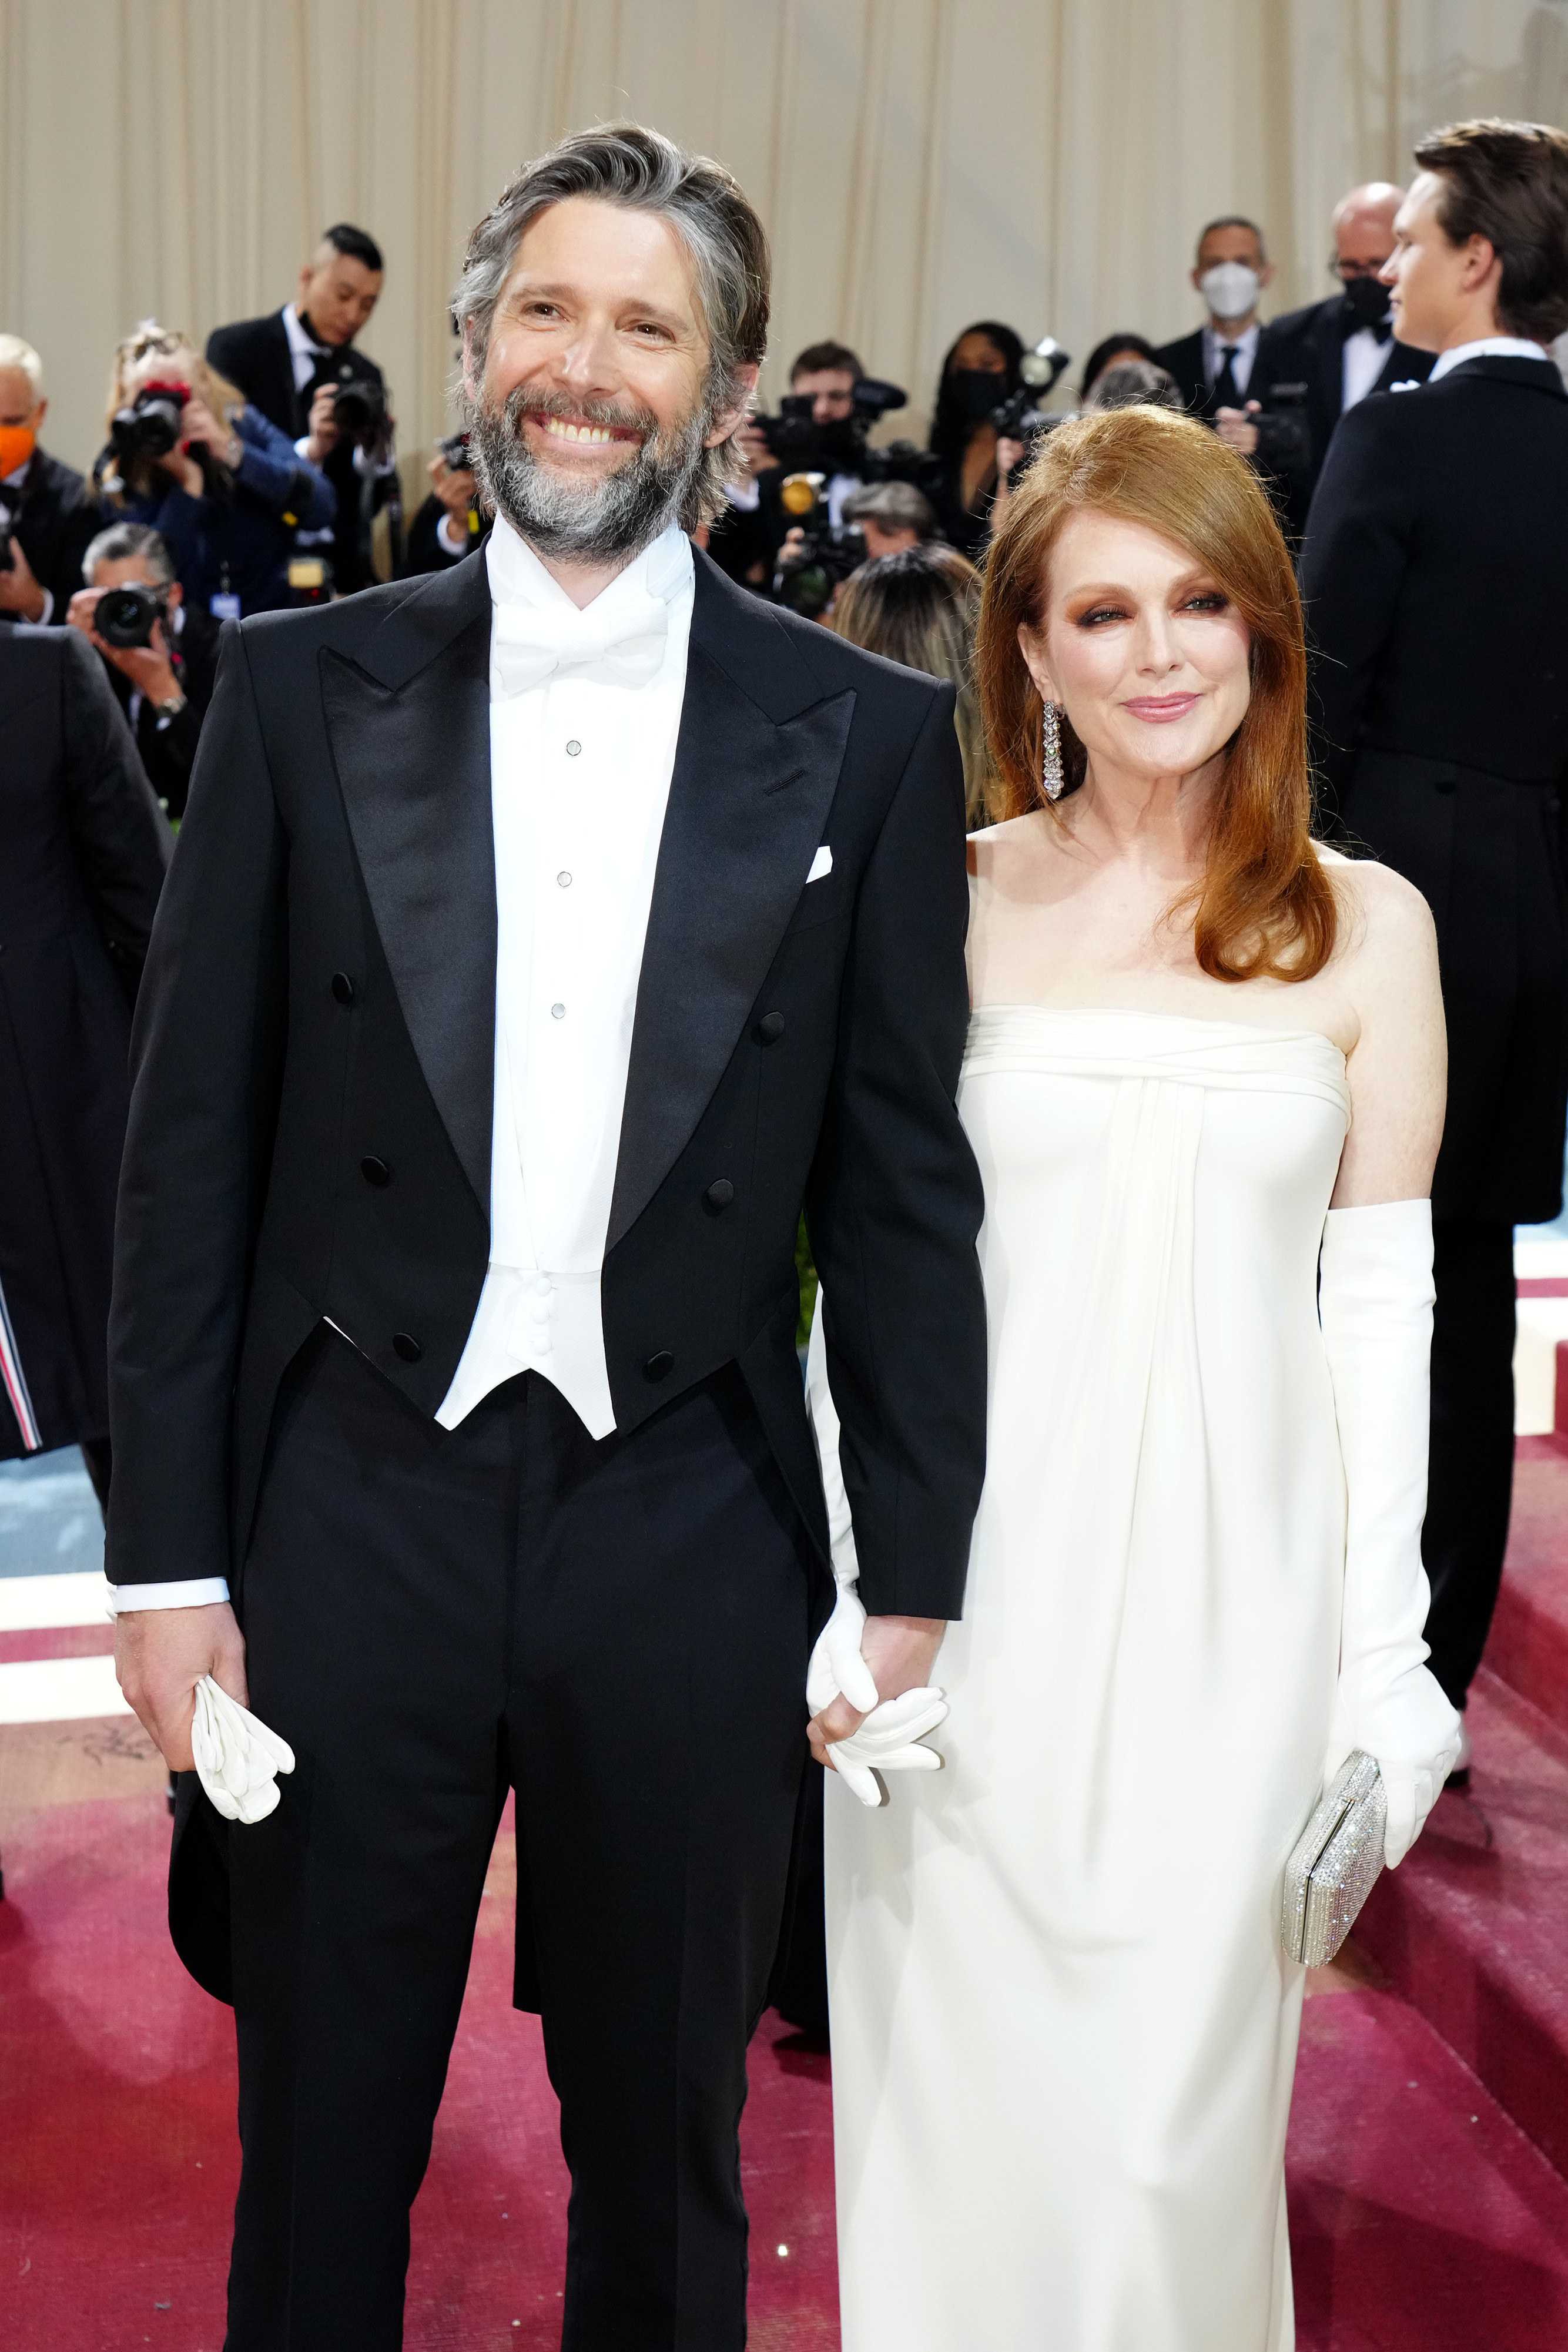 The couple at the MET Gala